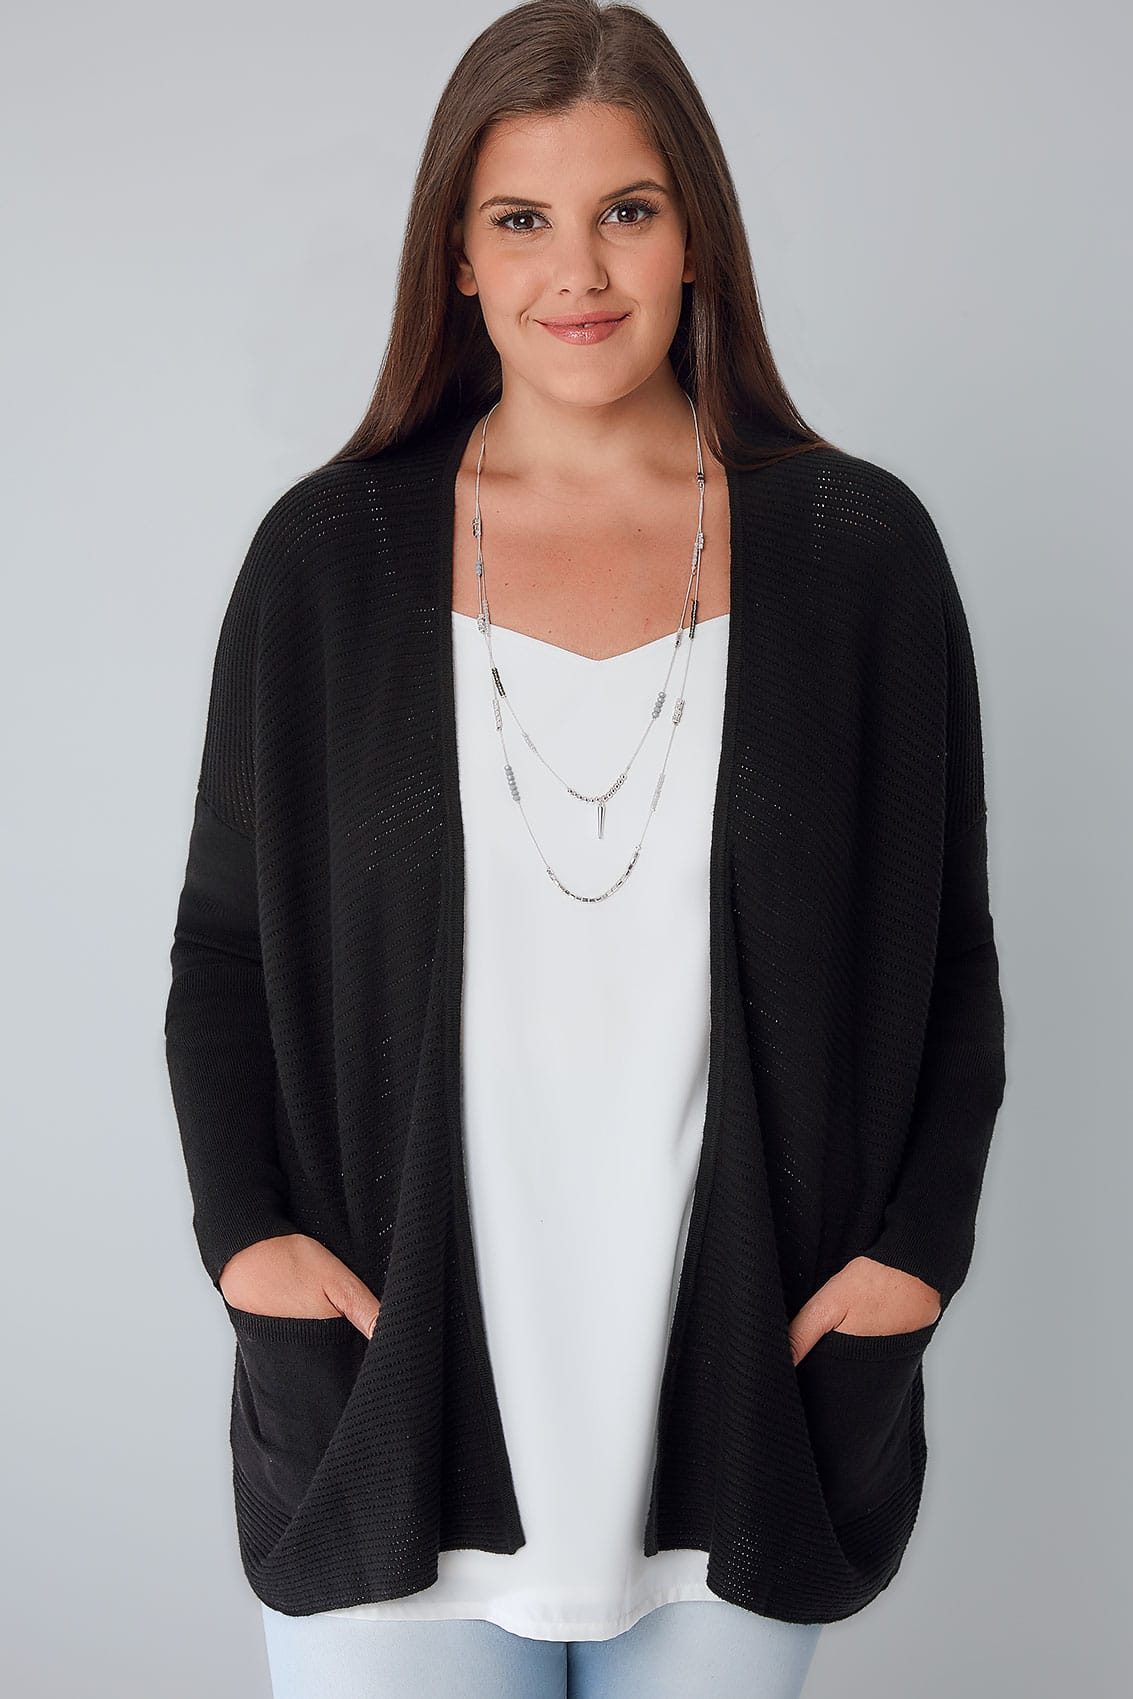 Black Fine Knitted Ribbed Cardigan plus size 16 to 32